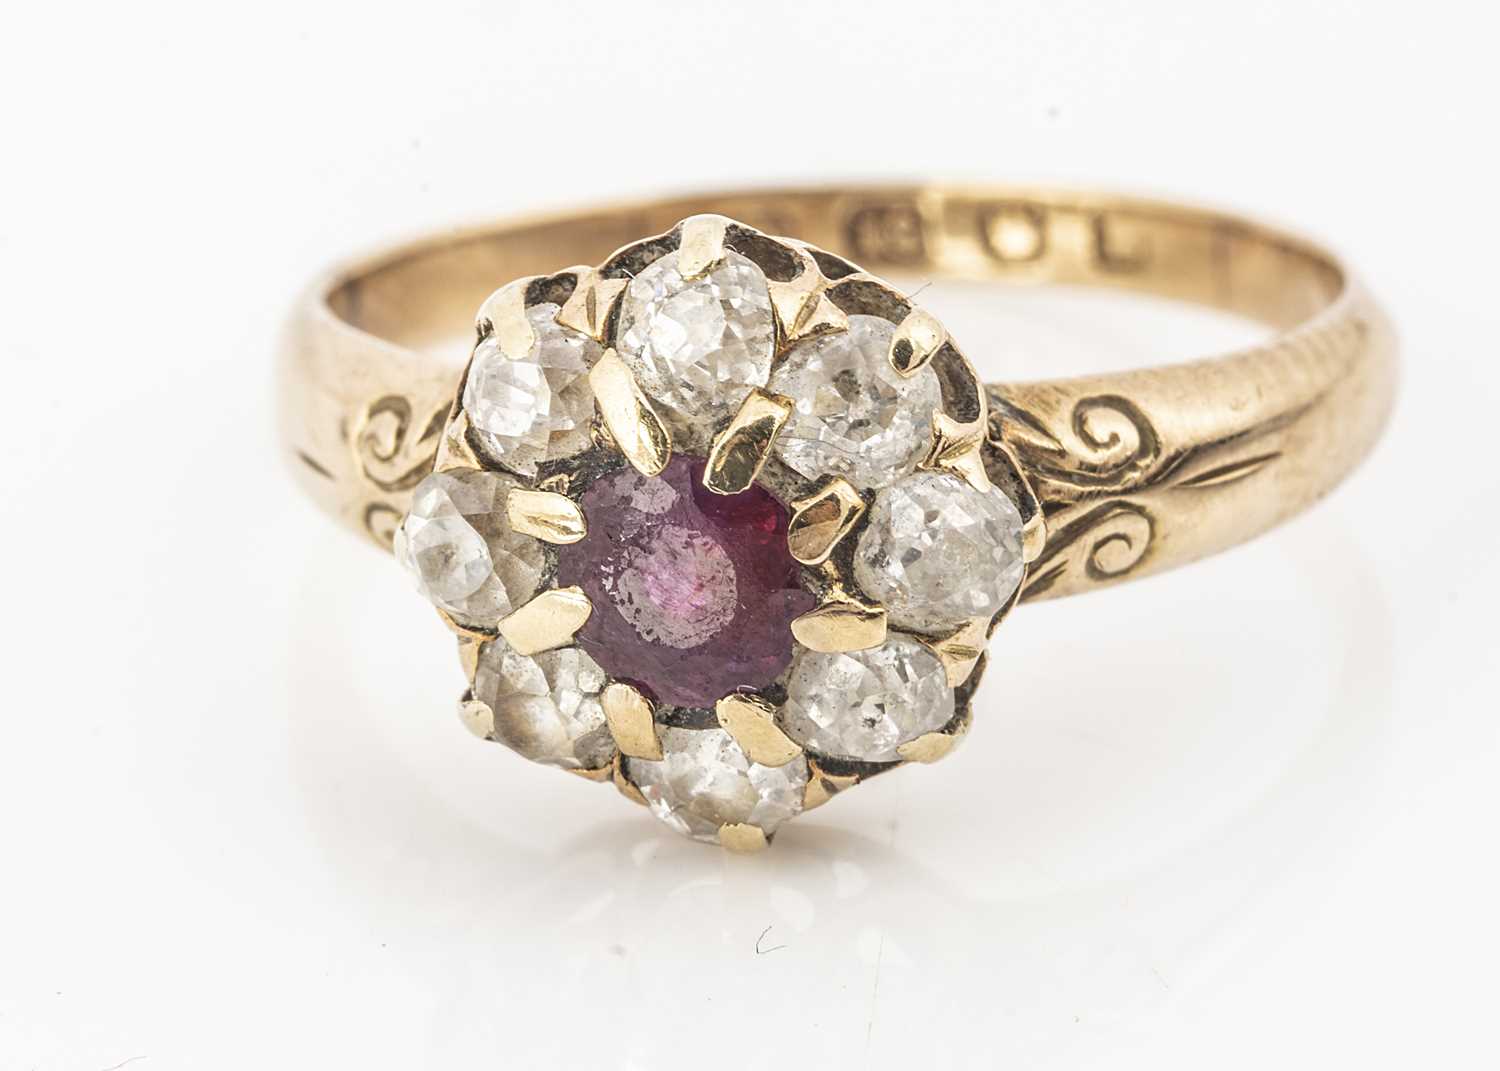 Lot 22 - An Edwardian period 18ct gold cluster ring